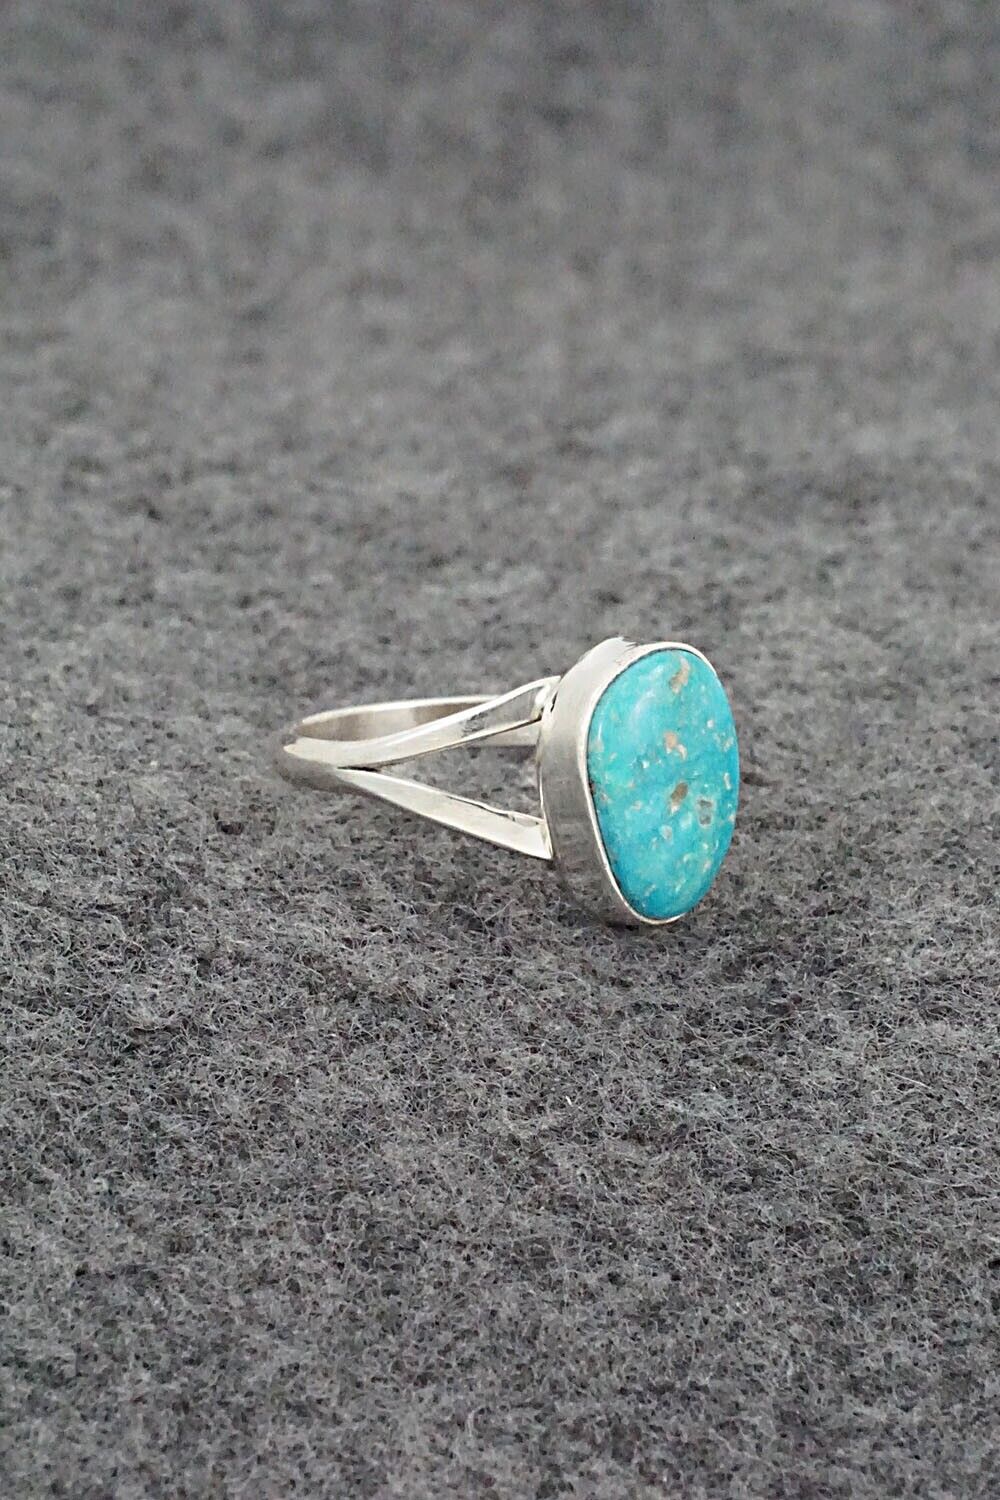 Turquoise & Sterling Silver Ring - Theresa Smith - Size 7.5